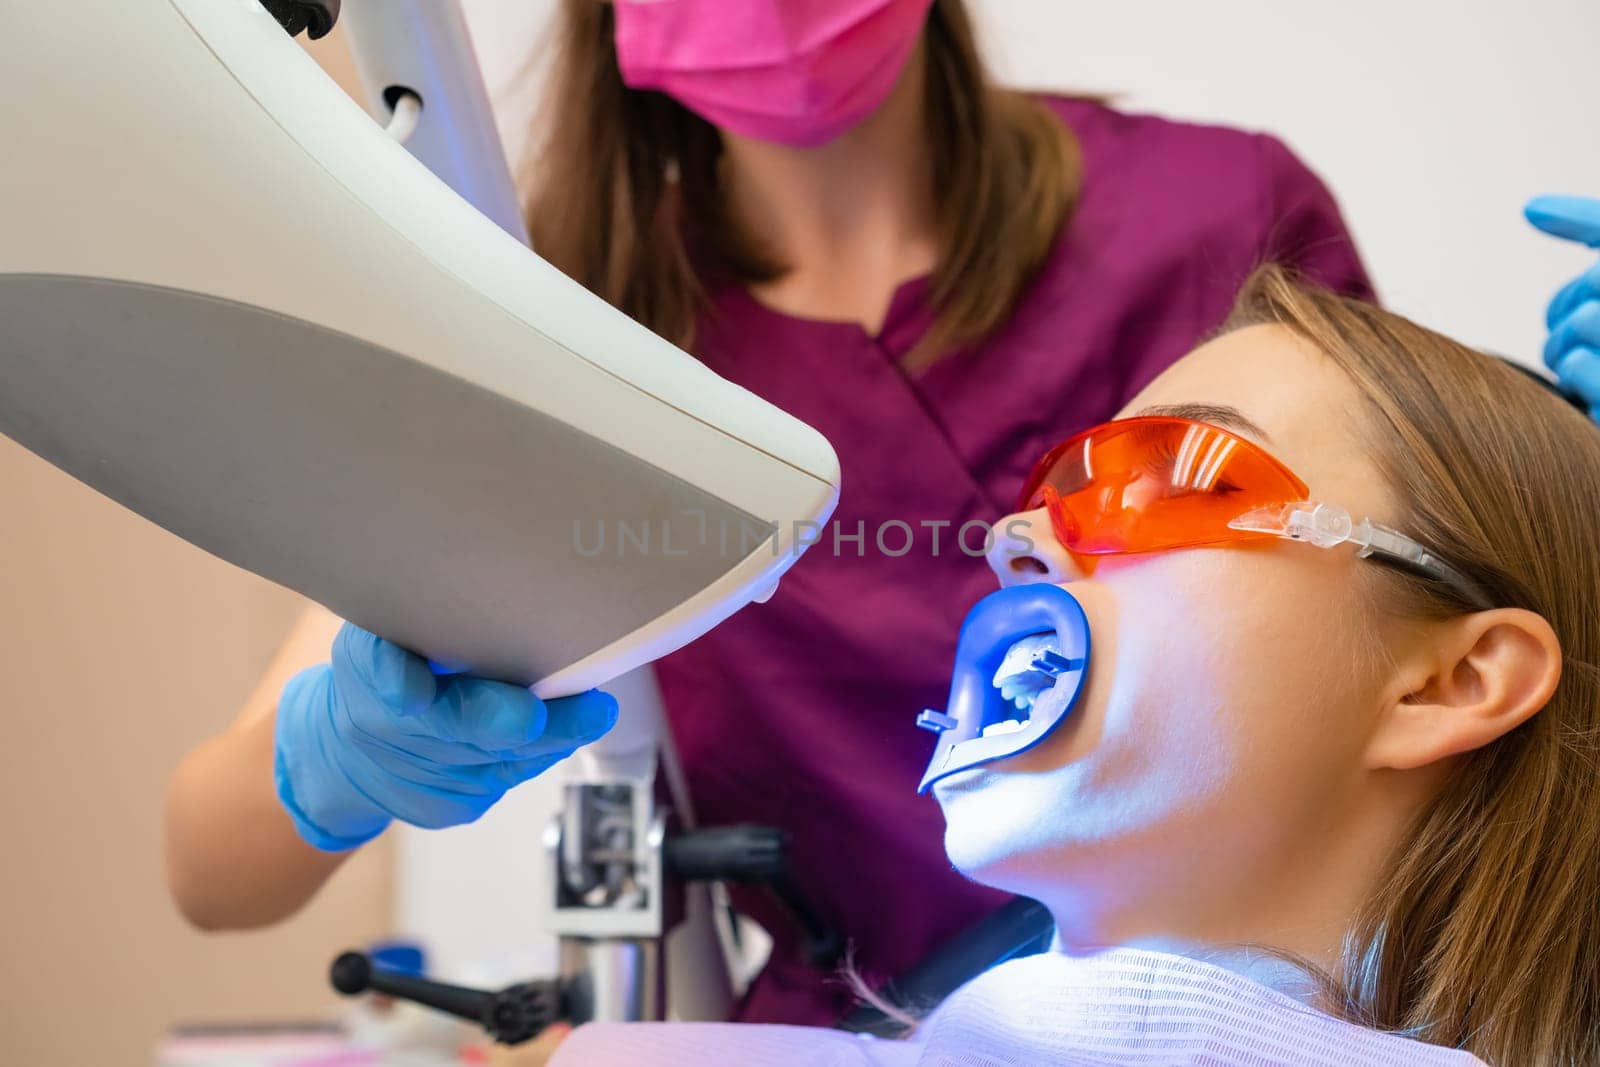 Teeth whitening for woman and application of laser bleaching teeth at dentist clinic